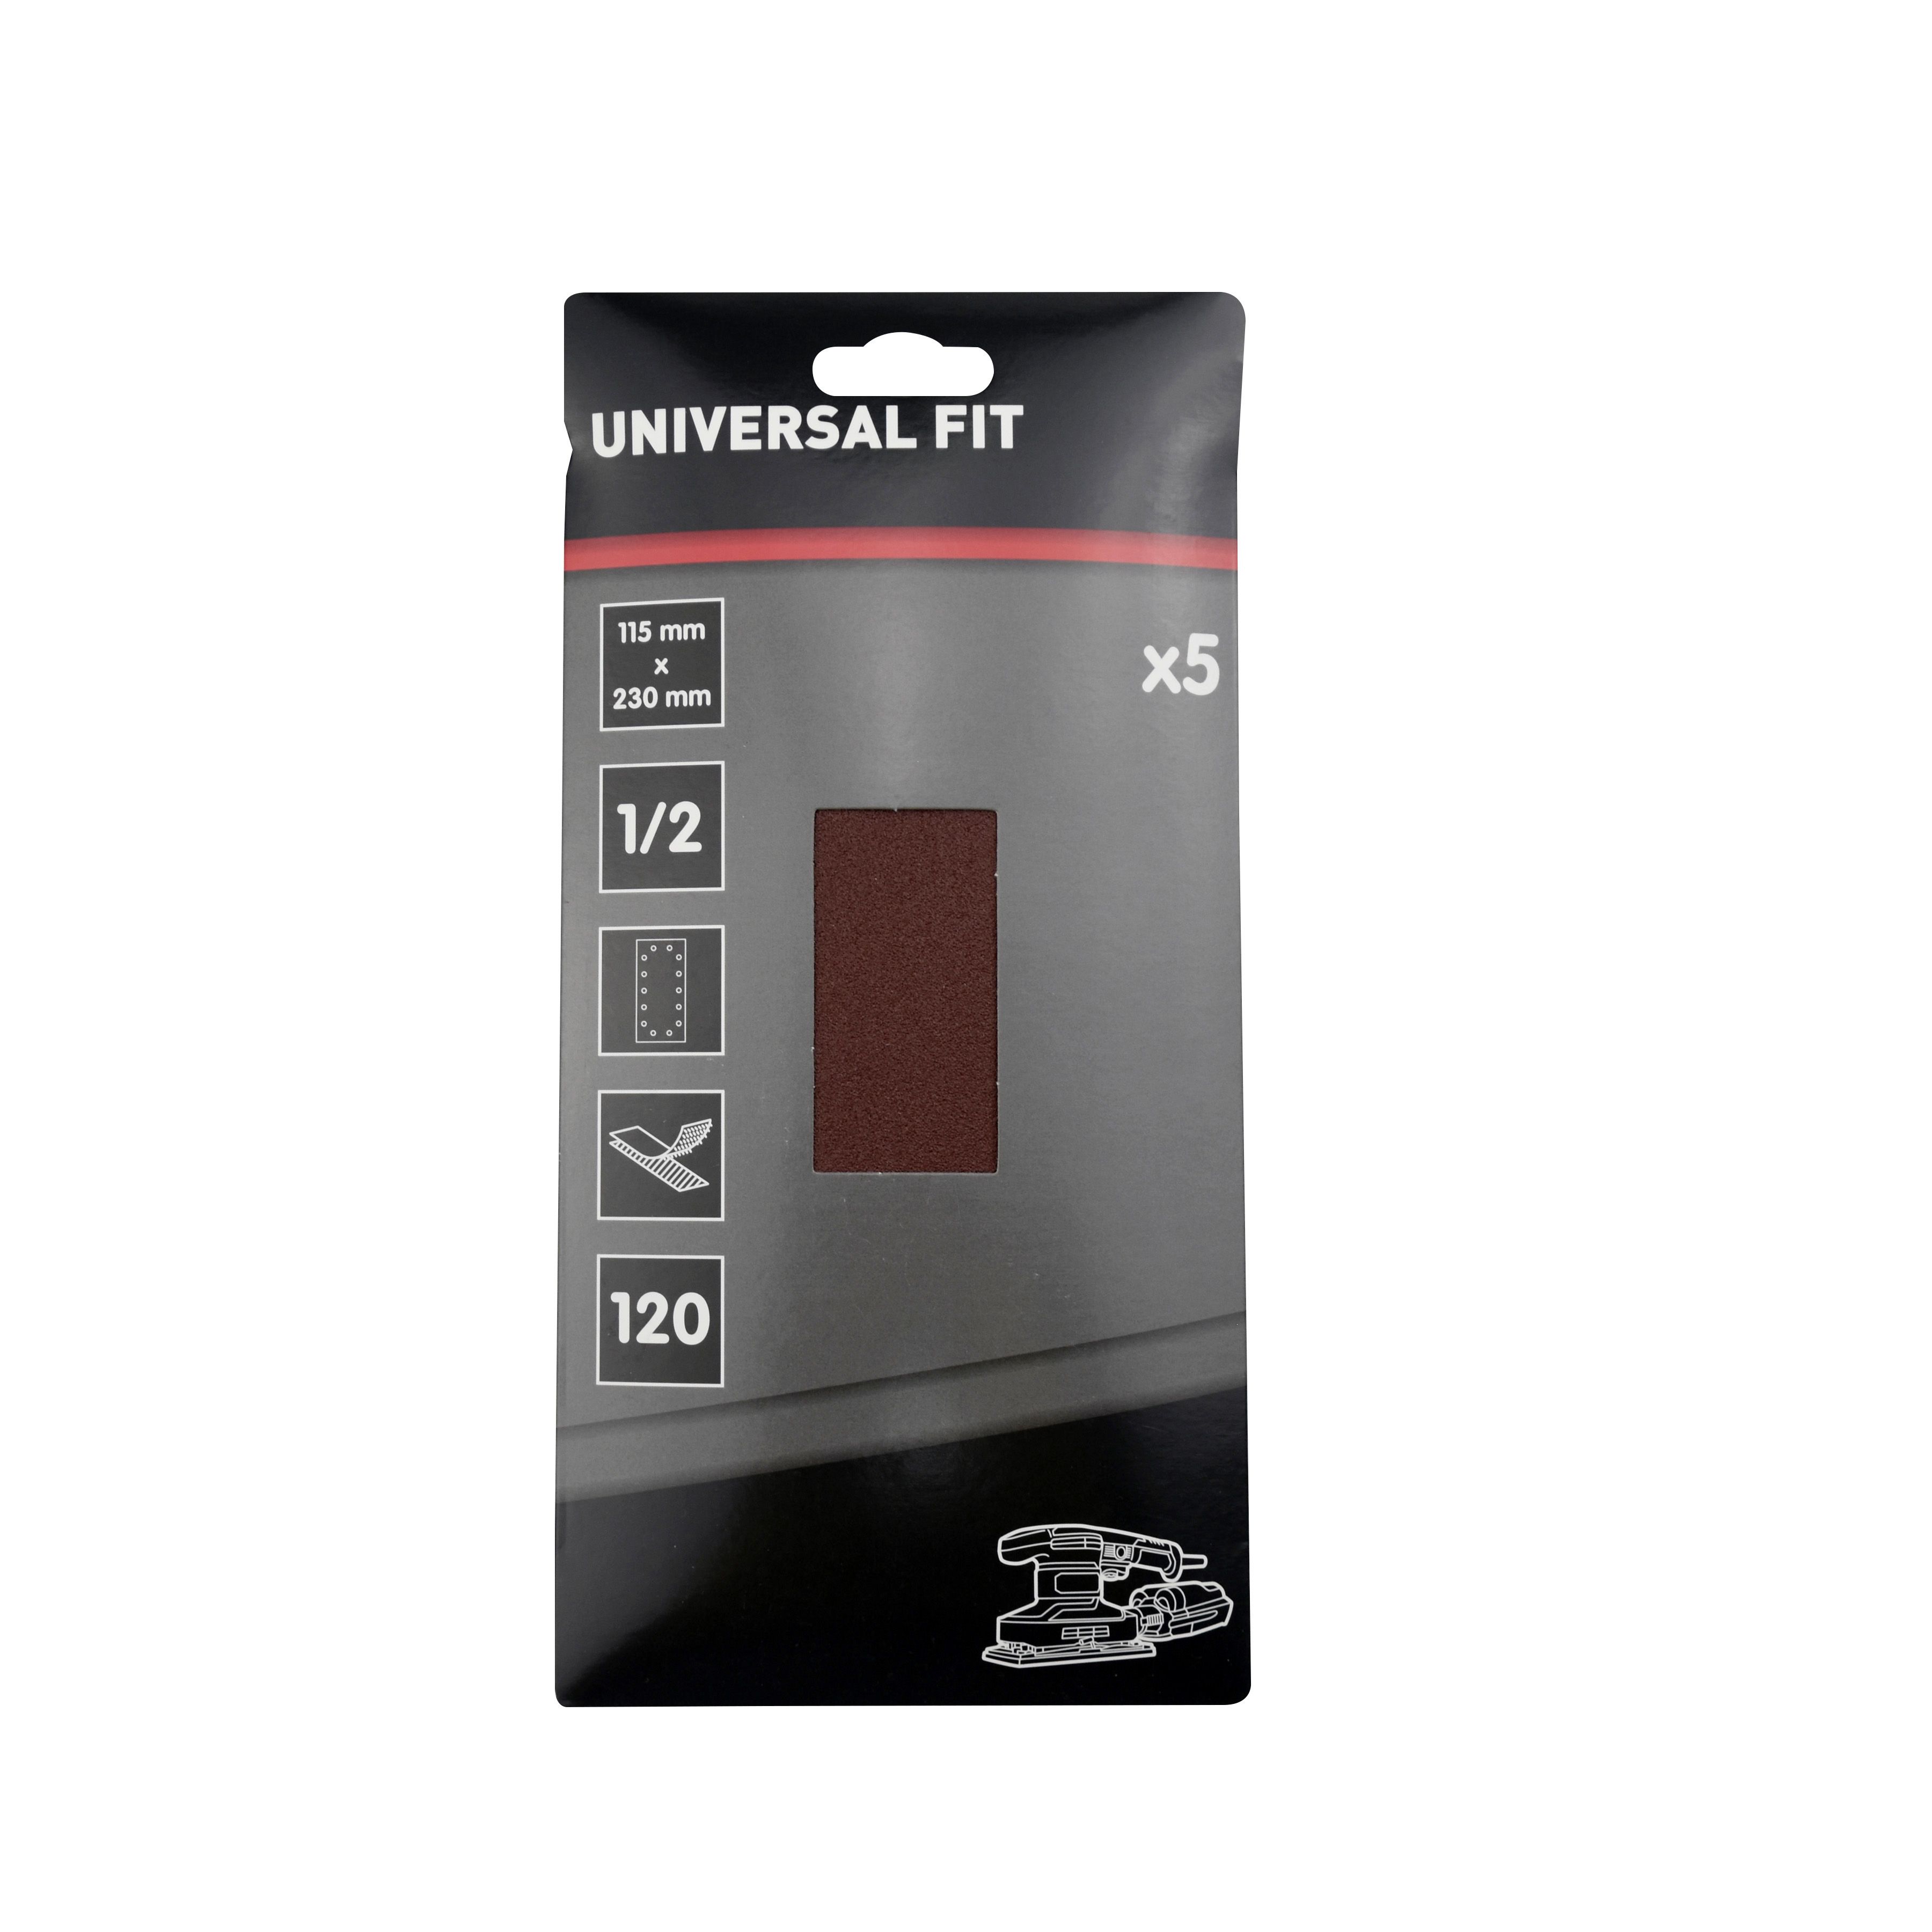 Universal Fit 120 grit Red 1/2 sanding sheet (L)230mm (W)115mm, Pack of 5